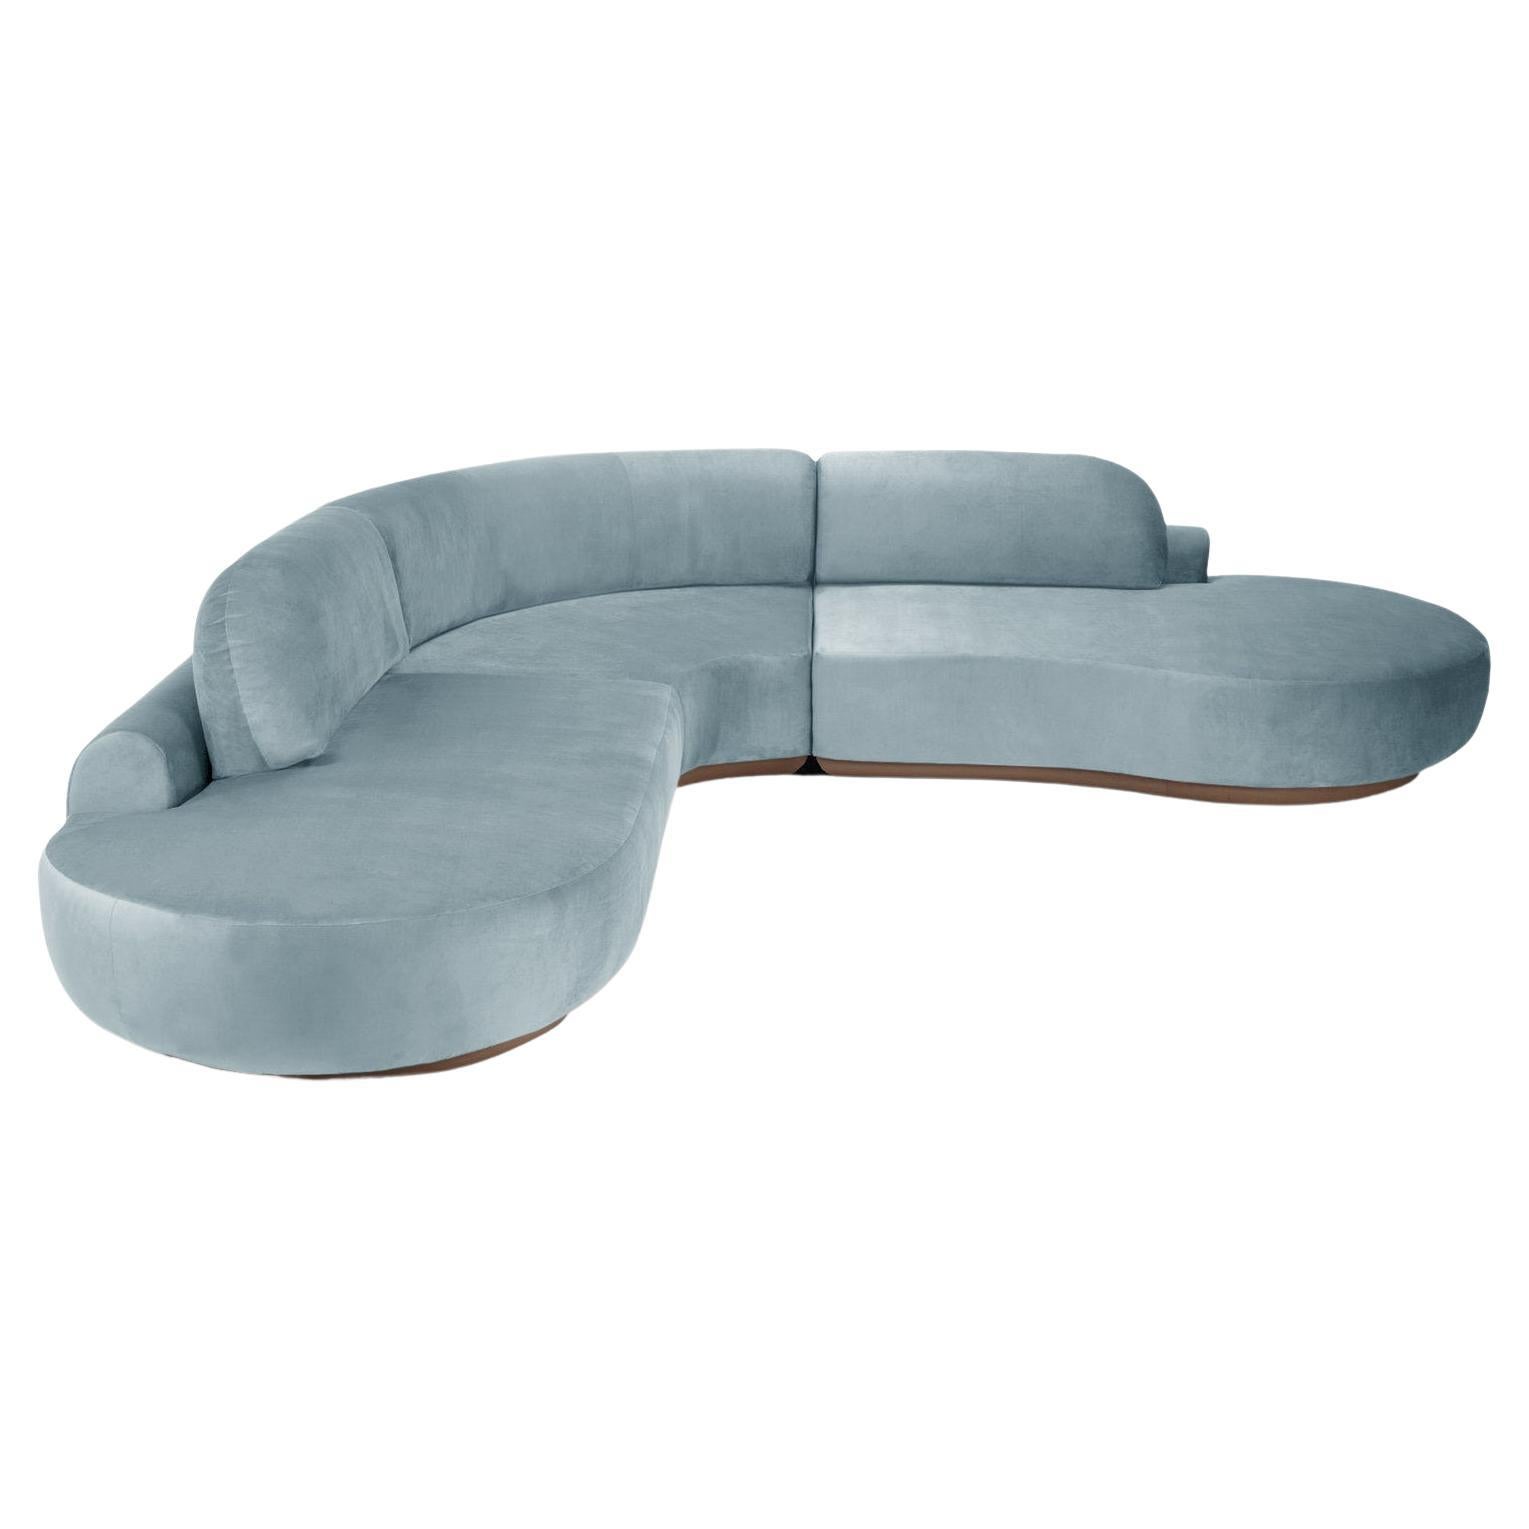 Naked Curved Sectional Sofa, 3 Piece with Wood and Paris Safira